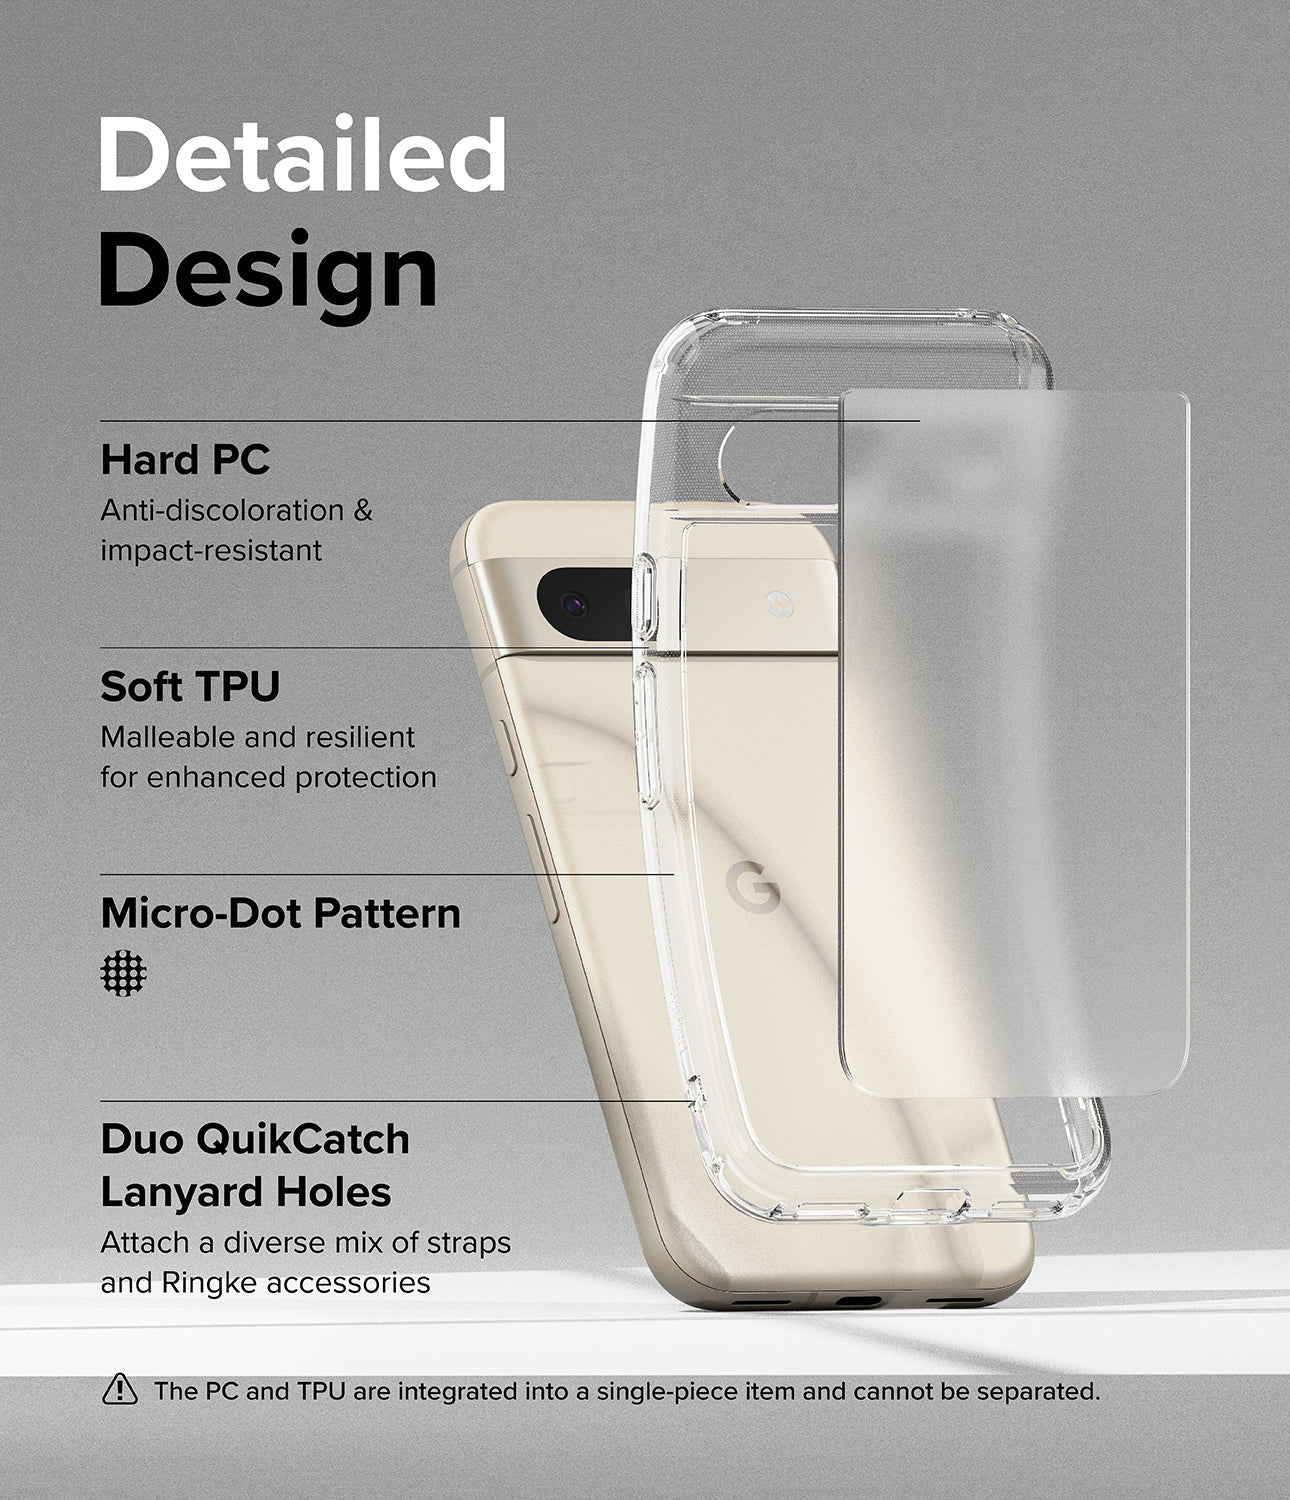 Google Pixel 8a Case | Fusion - Matte Clear - Detailed Design. Anti-discoloration and impact-resistant with Hard PC. Malleable and resilient for enhanced protection with Soft TPU. Micro-Dot Pattern. Attach a diverse mix of straps and Ringke accessories with Duo QuikCatch Lanyard Holes.